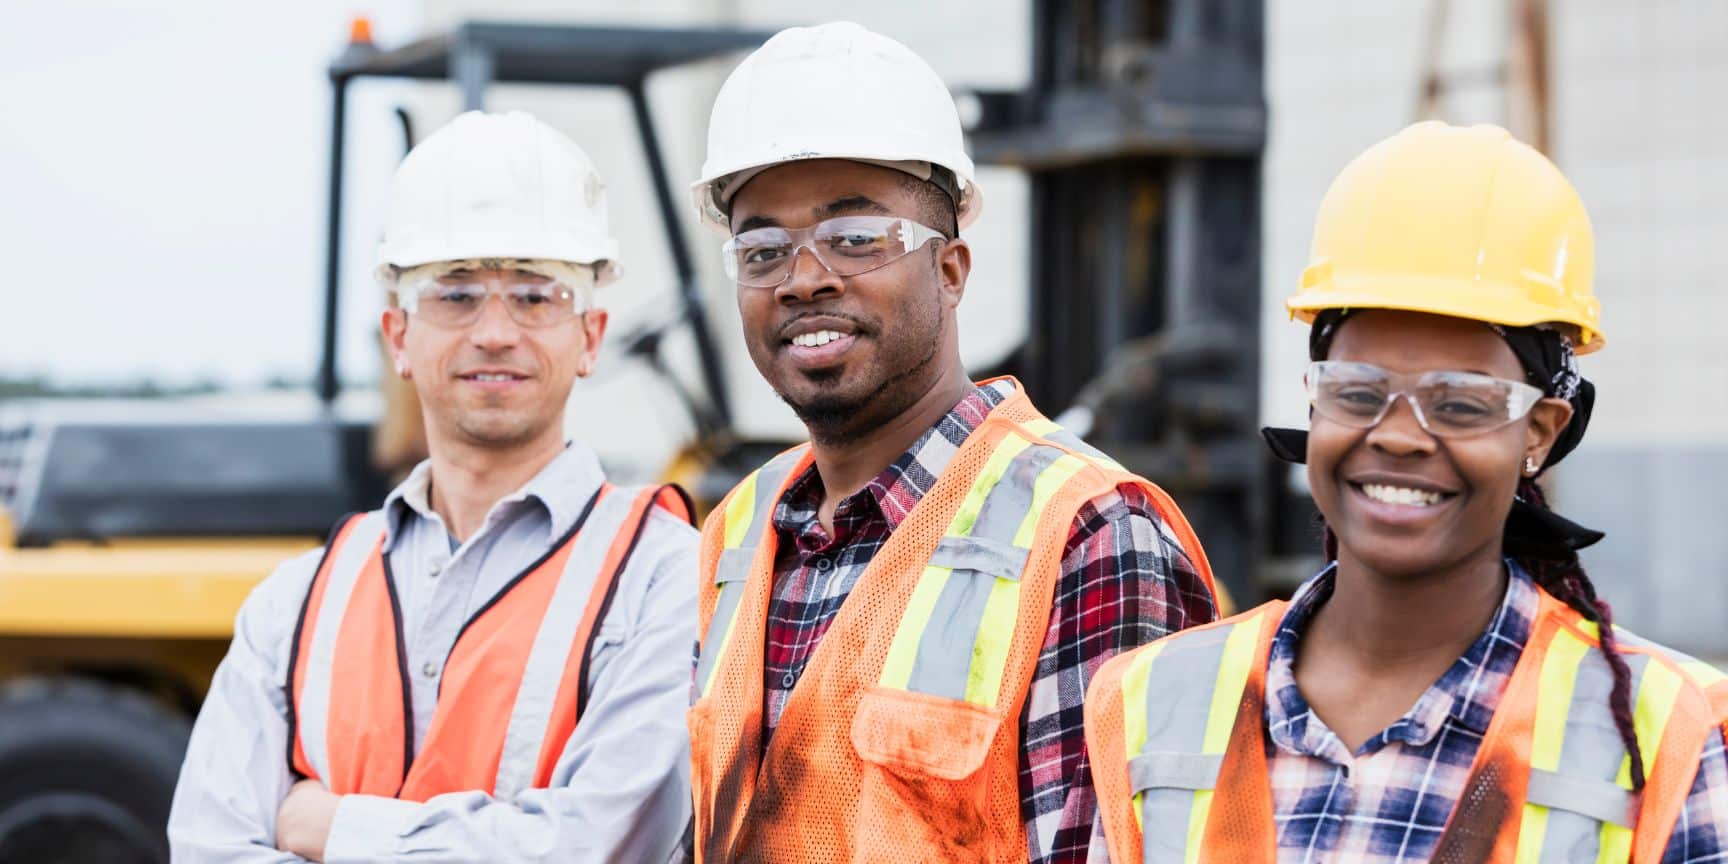 Industrial workers smiling wearing hard hats